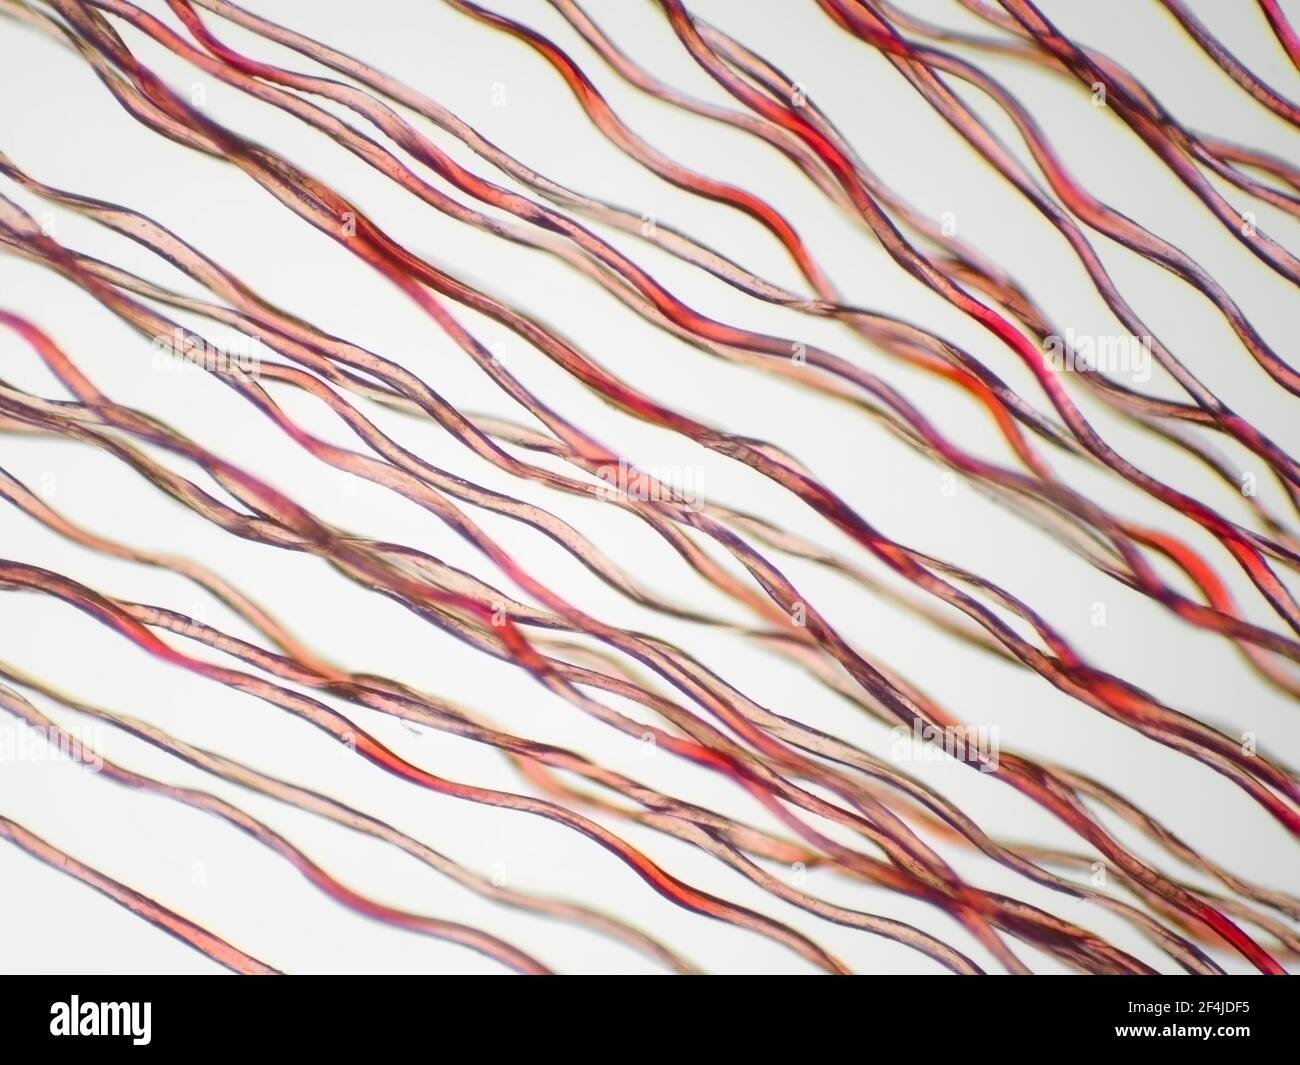 Red synthetic fibers under the microscope, horizontal field of view is about 1.2mm Stock Photo